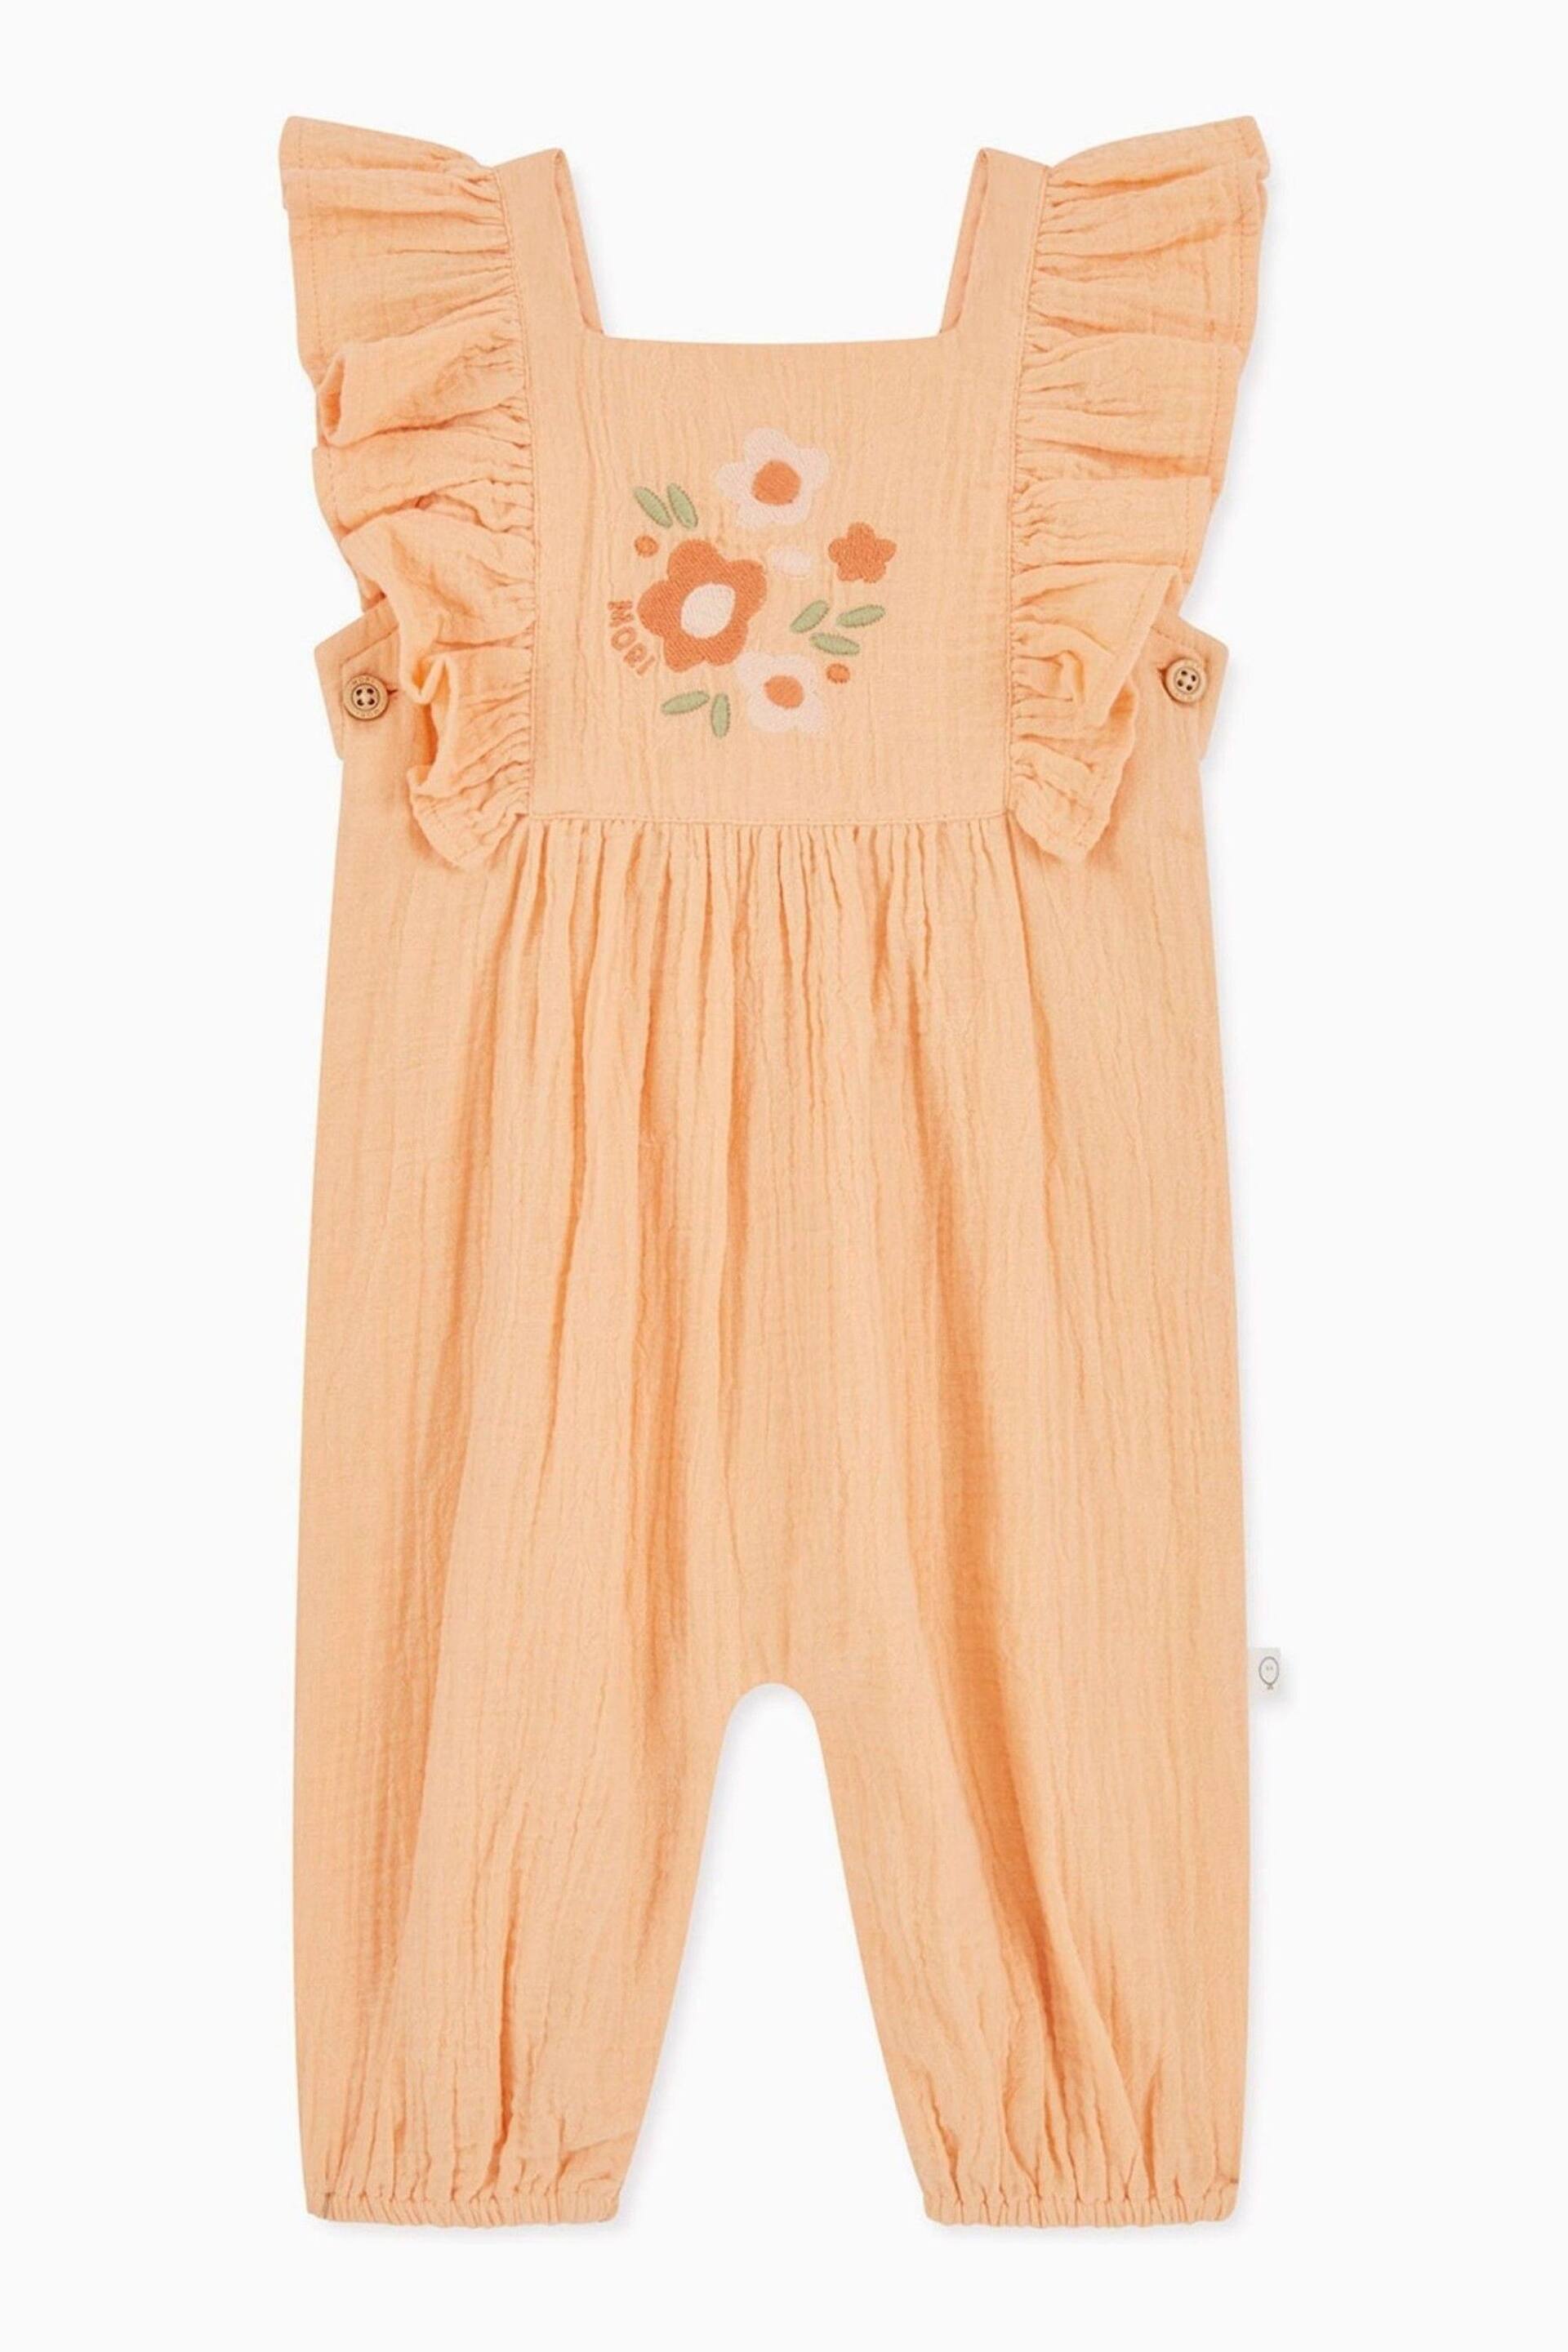 MORI Pink Organic Cotton Muslin Peach Embroidered Summer Dungarees - Image 5 of 6